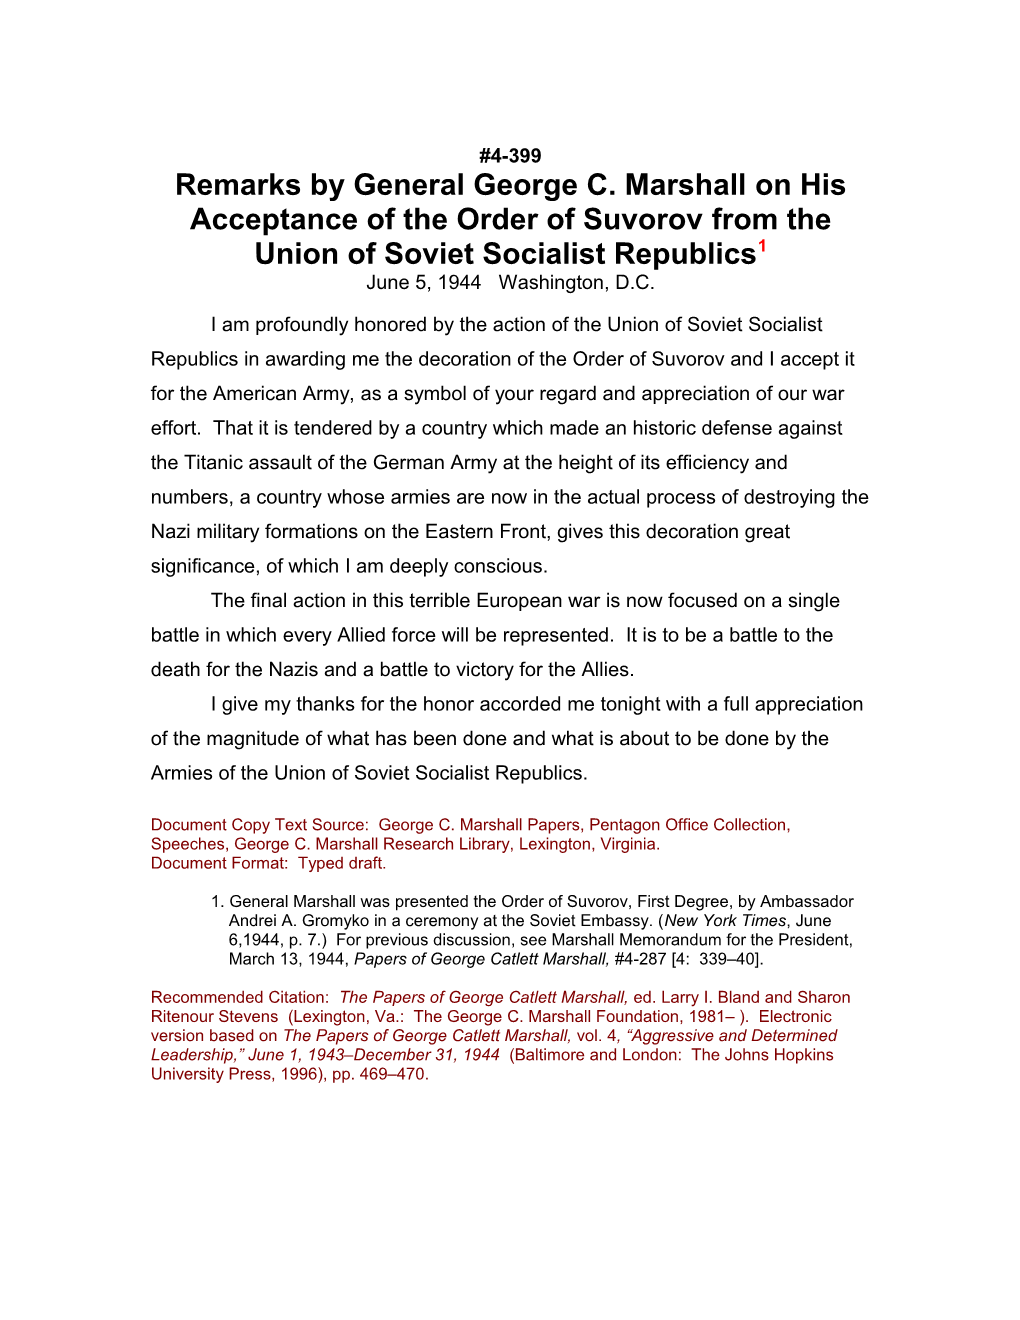 Remarks by General George C. Marshall on His Acceptance of the Order of Suvorov from The